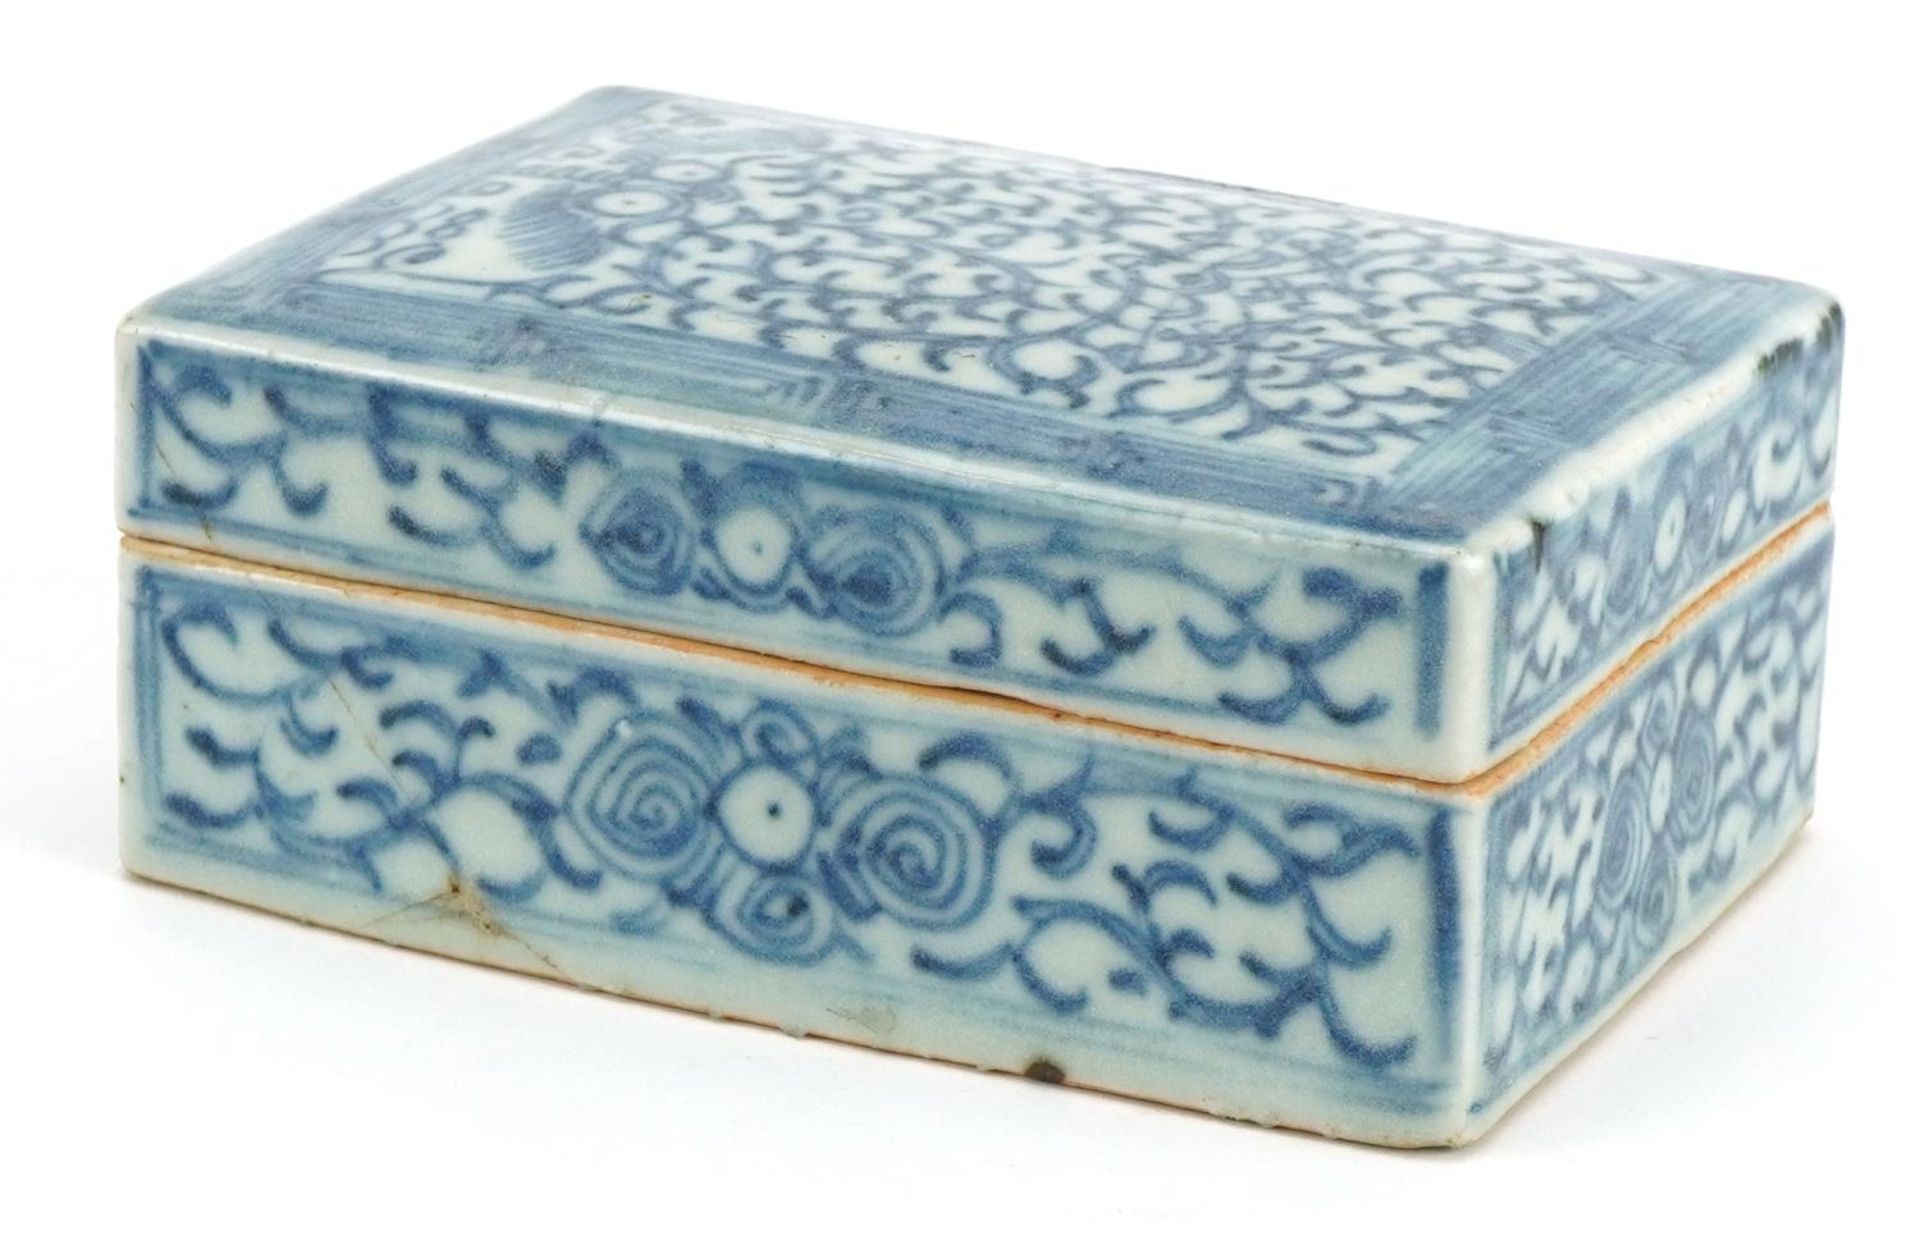 Chinese blue and white porcelain box and cover hand painted with flowers, incised with calligraphy